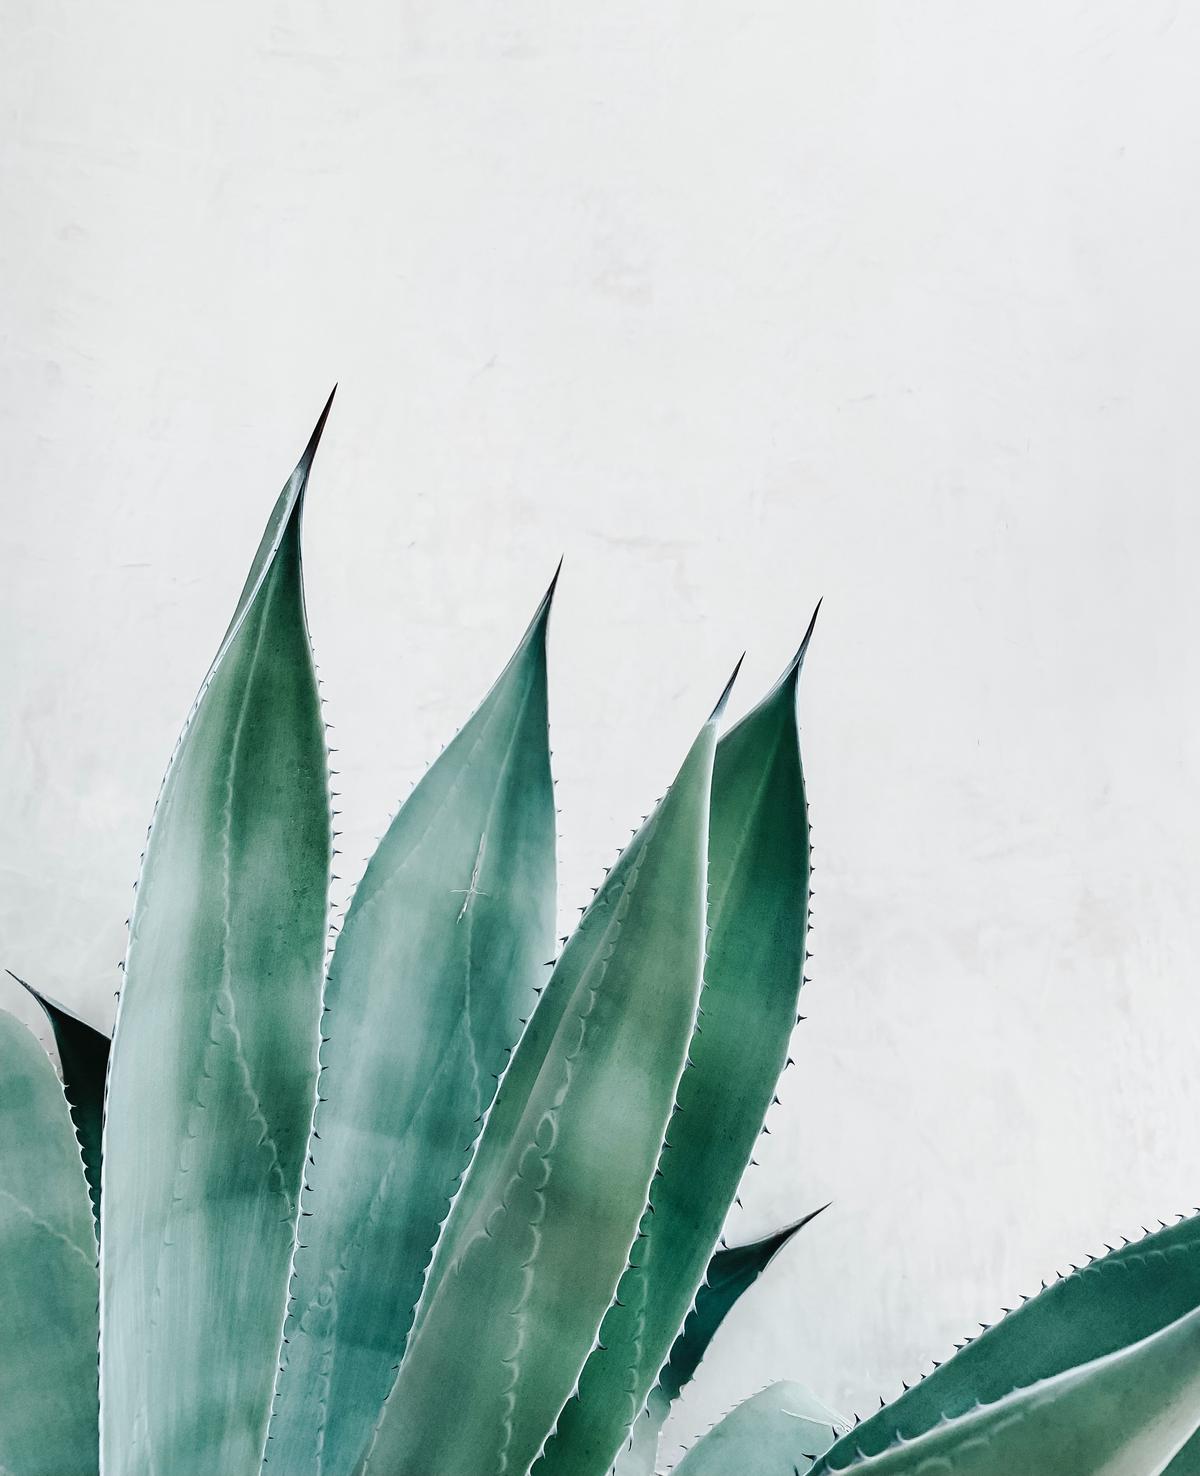 A photo of an aloe plant with thick fleshy leaves, showcasing its desert origin and water-storage capabilities